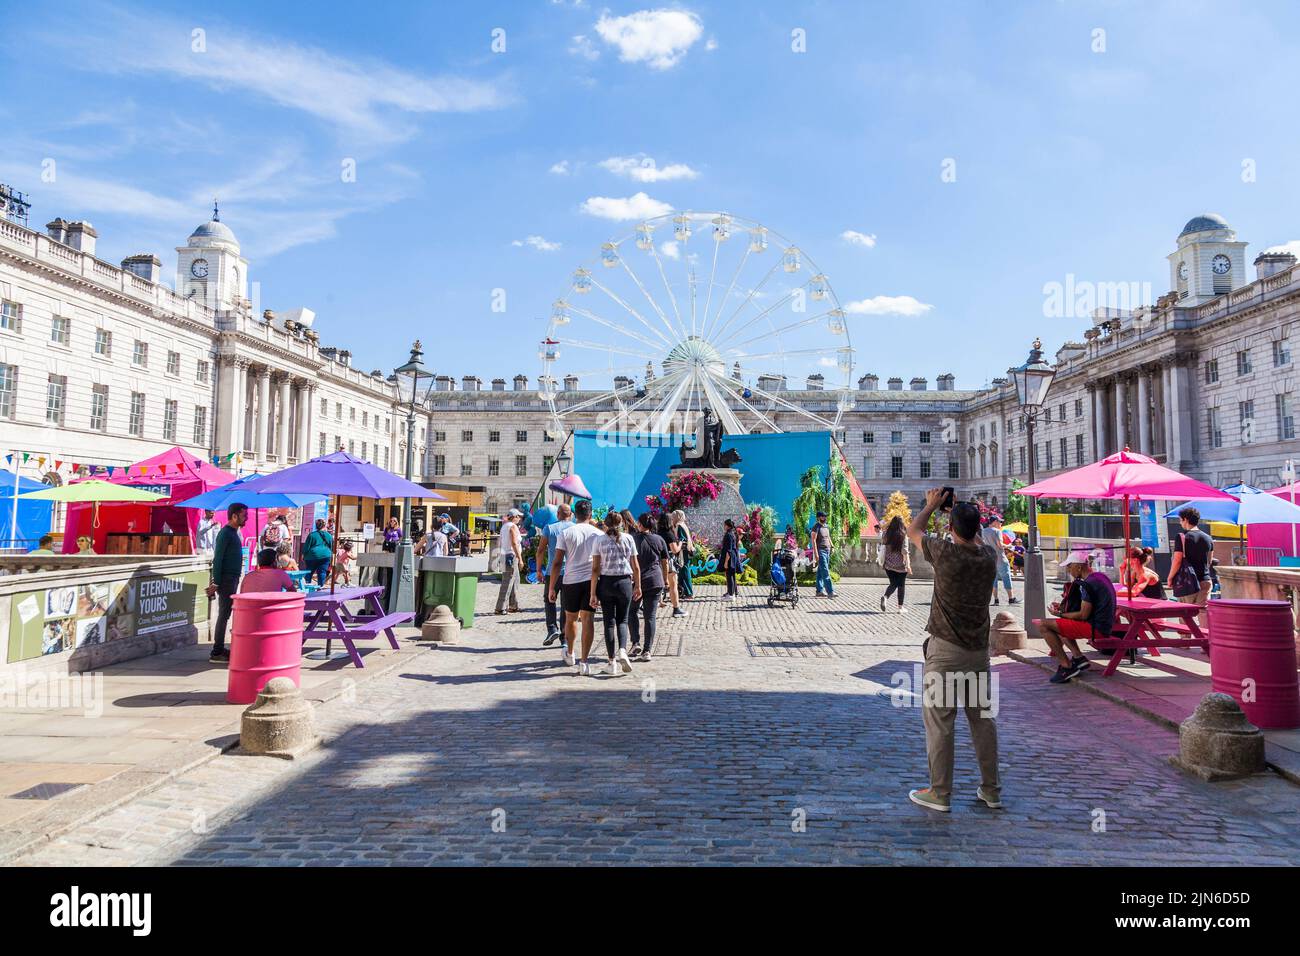 This Bright Land at Somerset House in London,England,UK Stock Photo